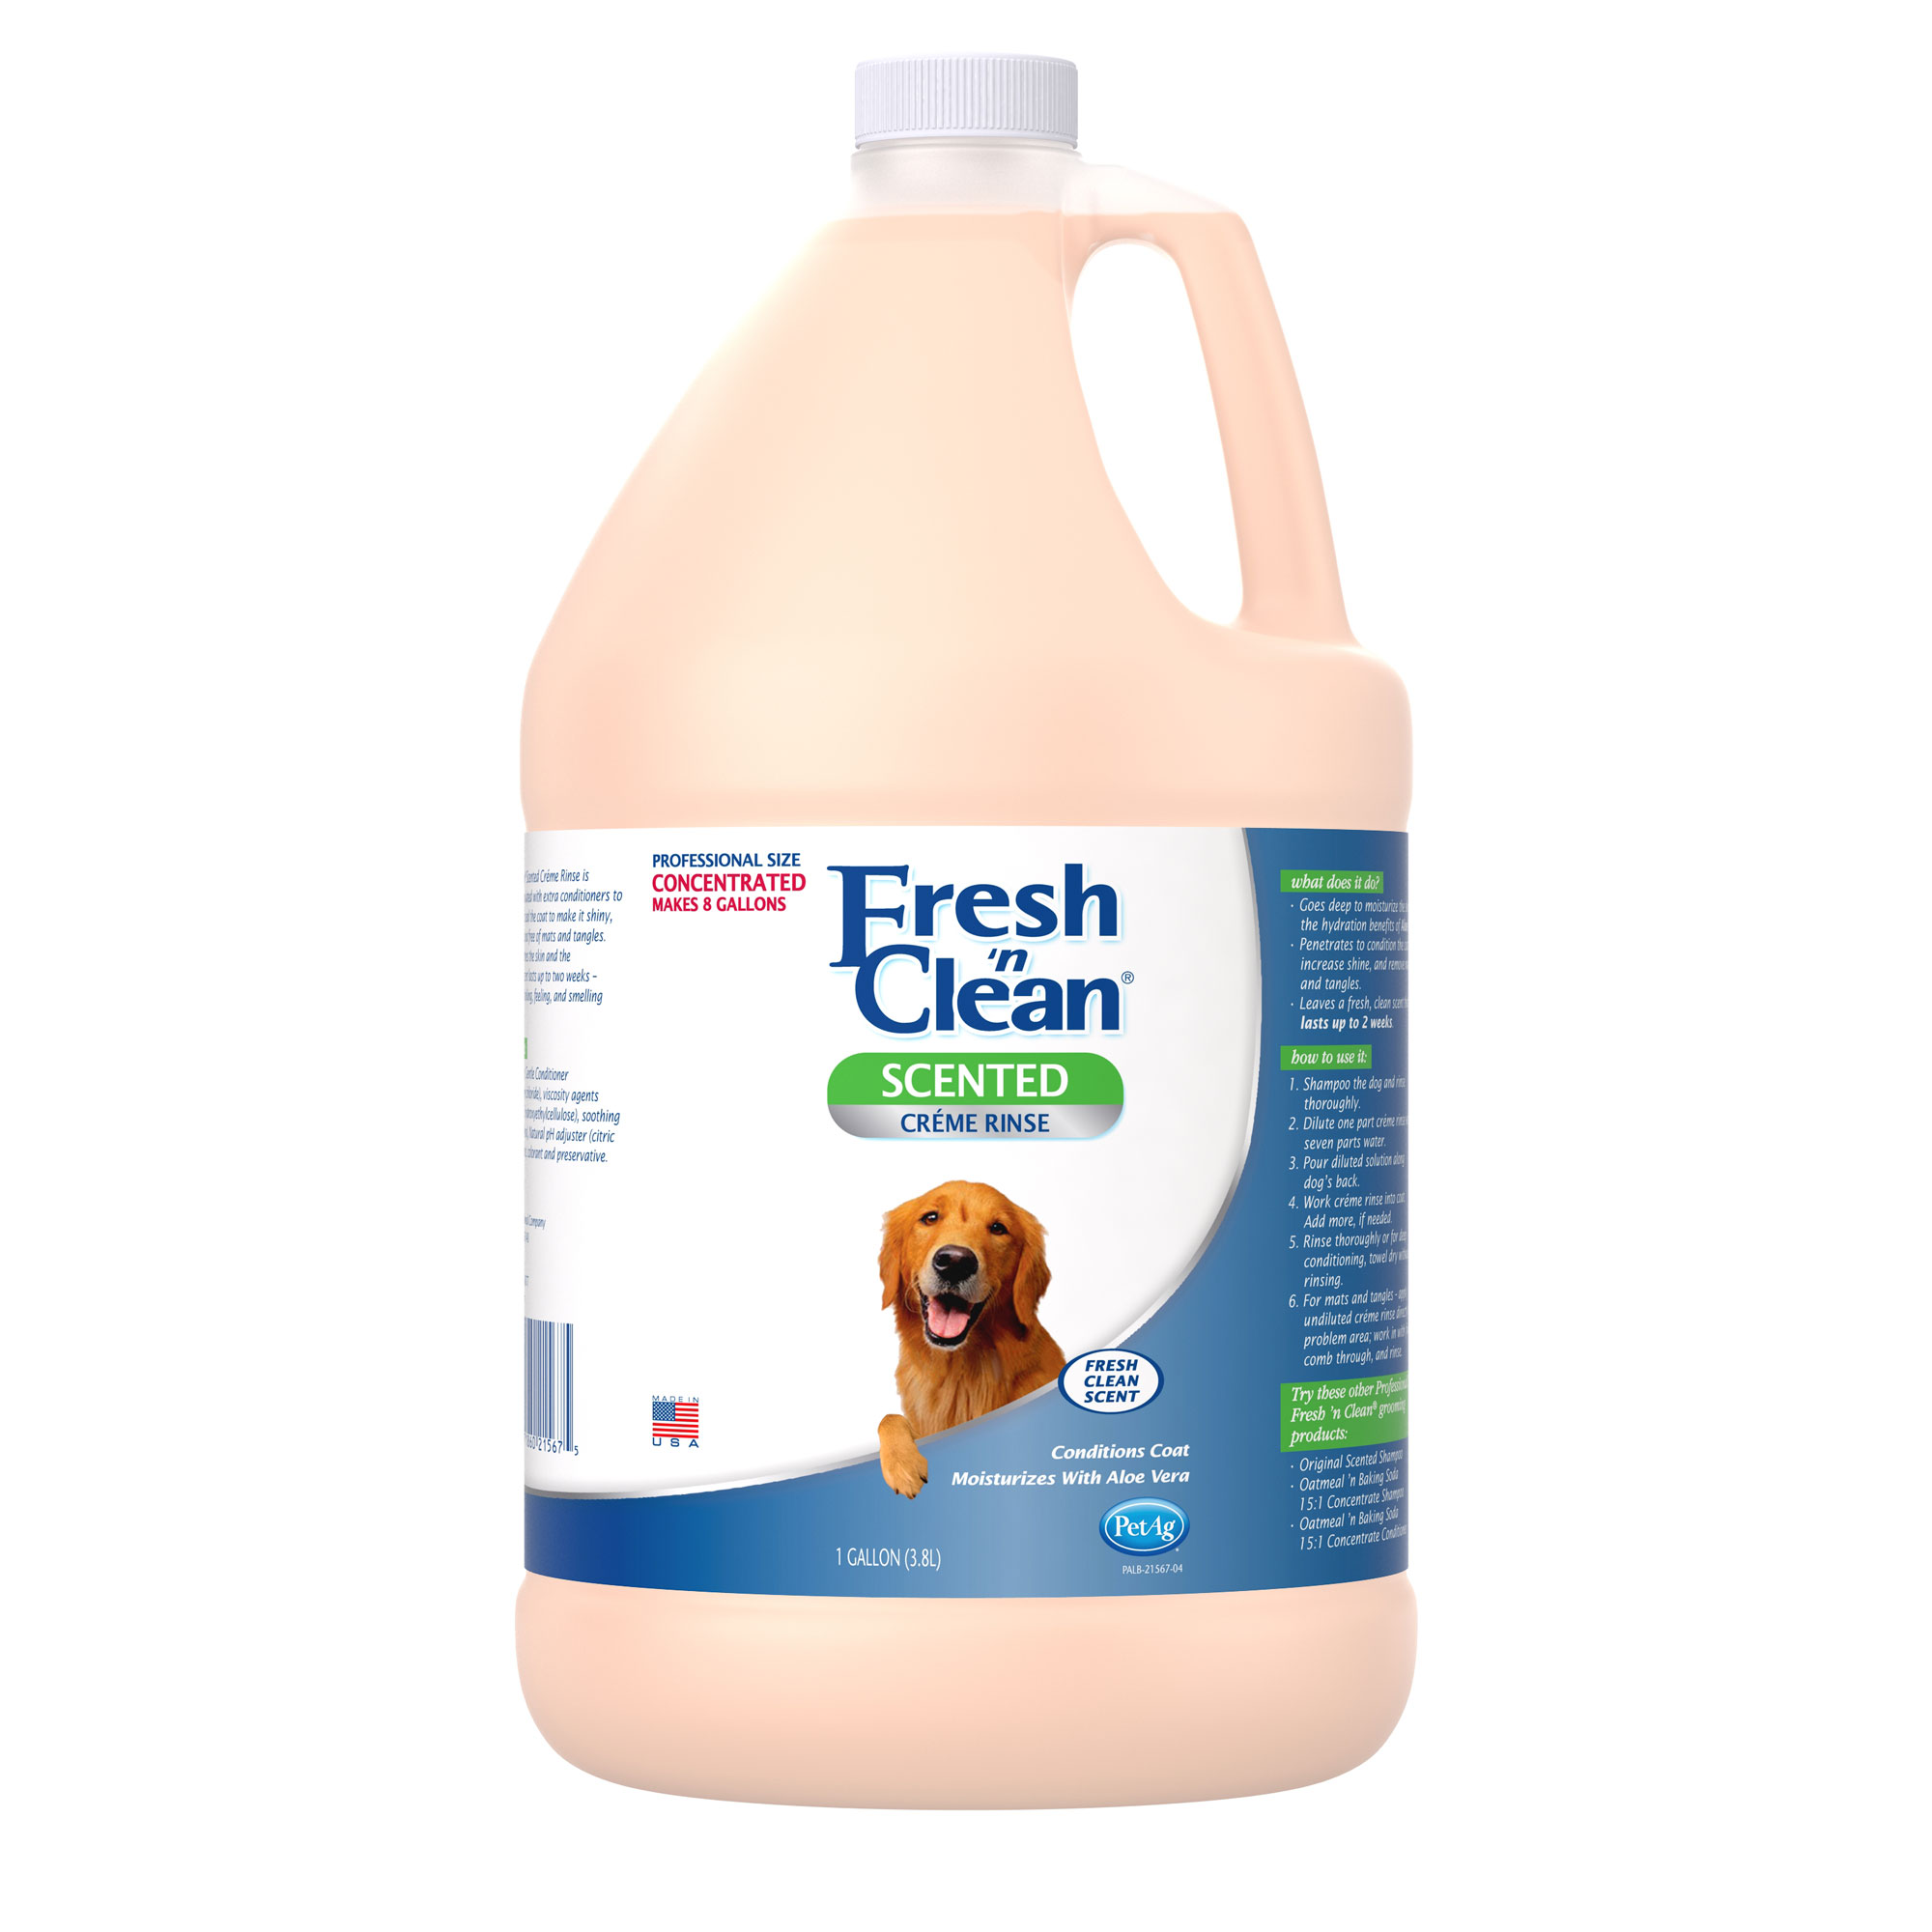 fresh 'n clean creme rinse fresh clean scent 7:1 concentrate gallon